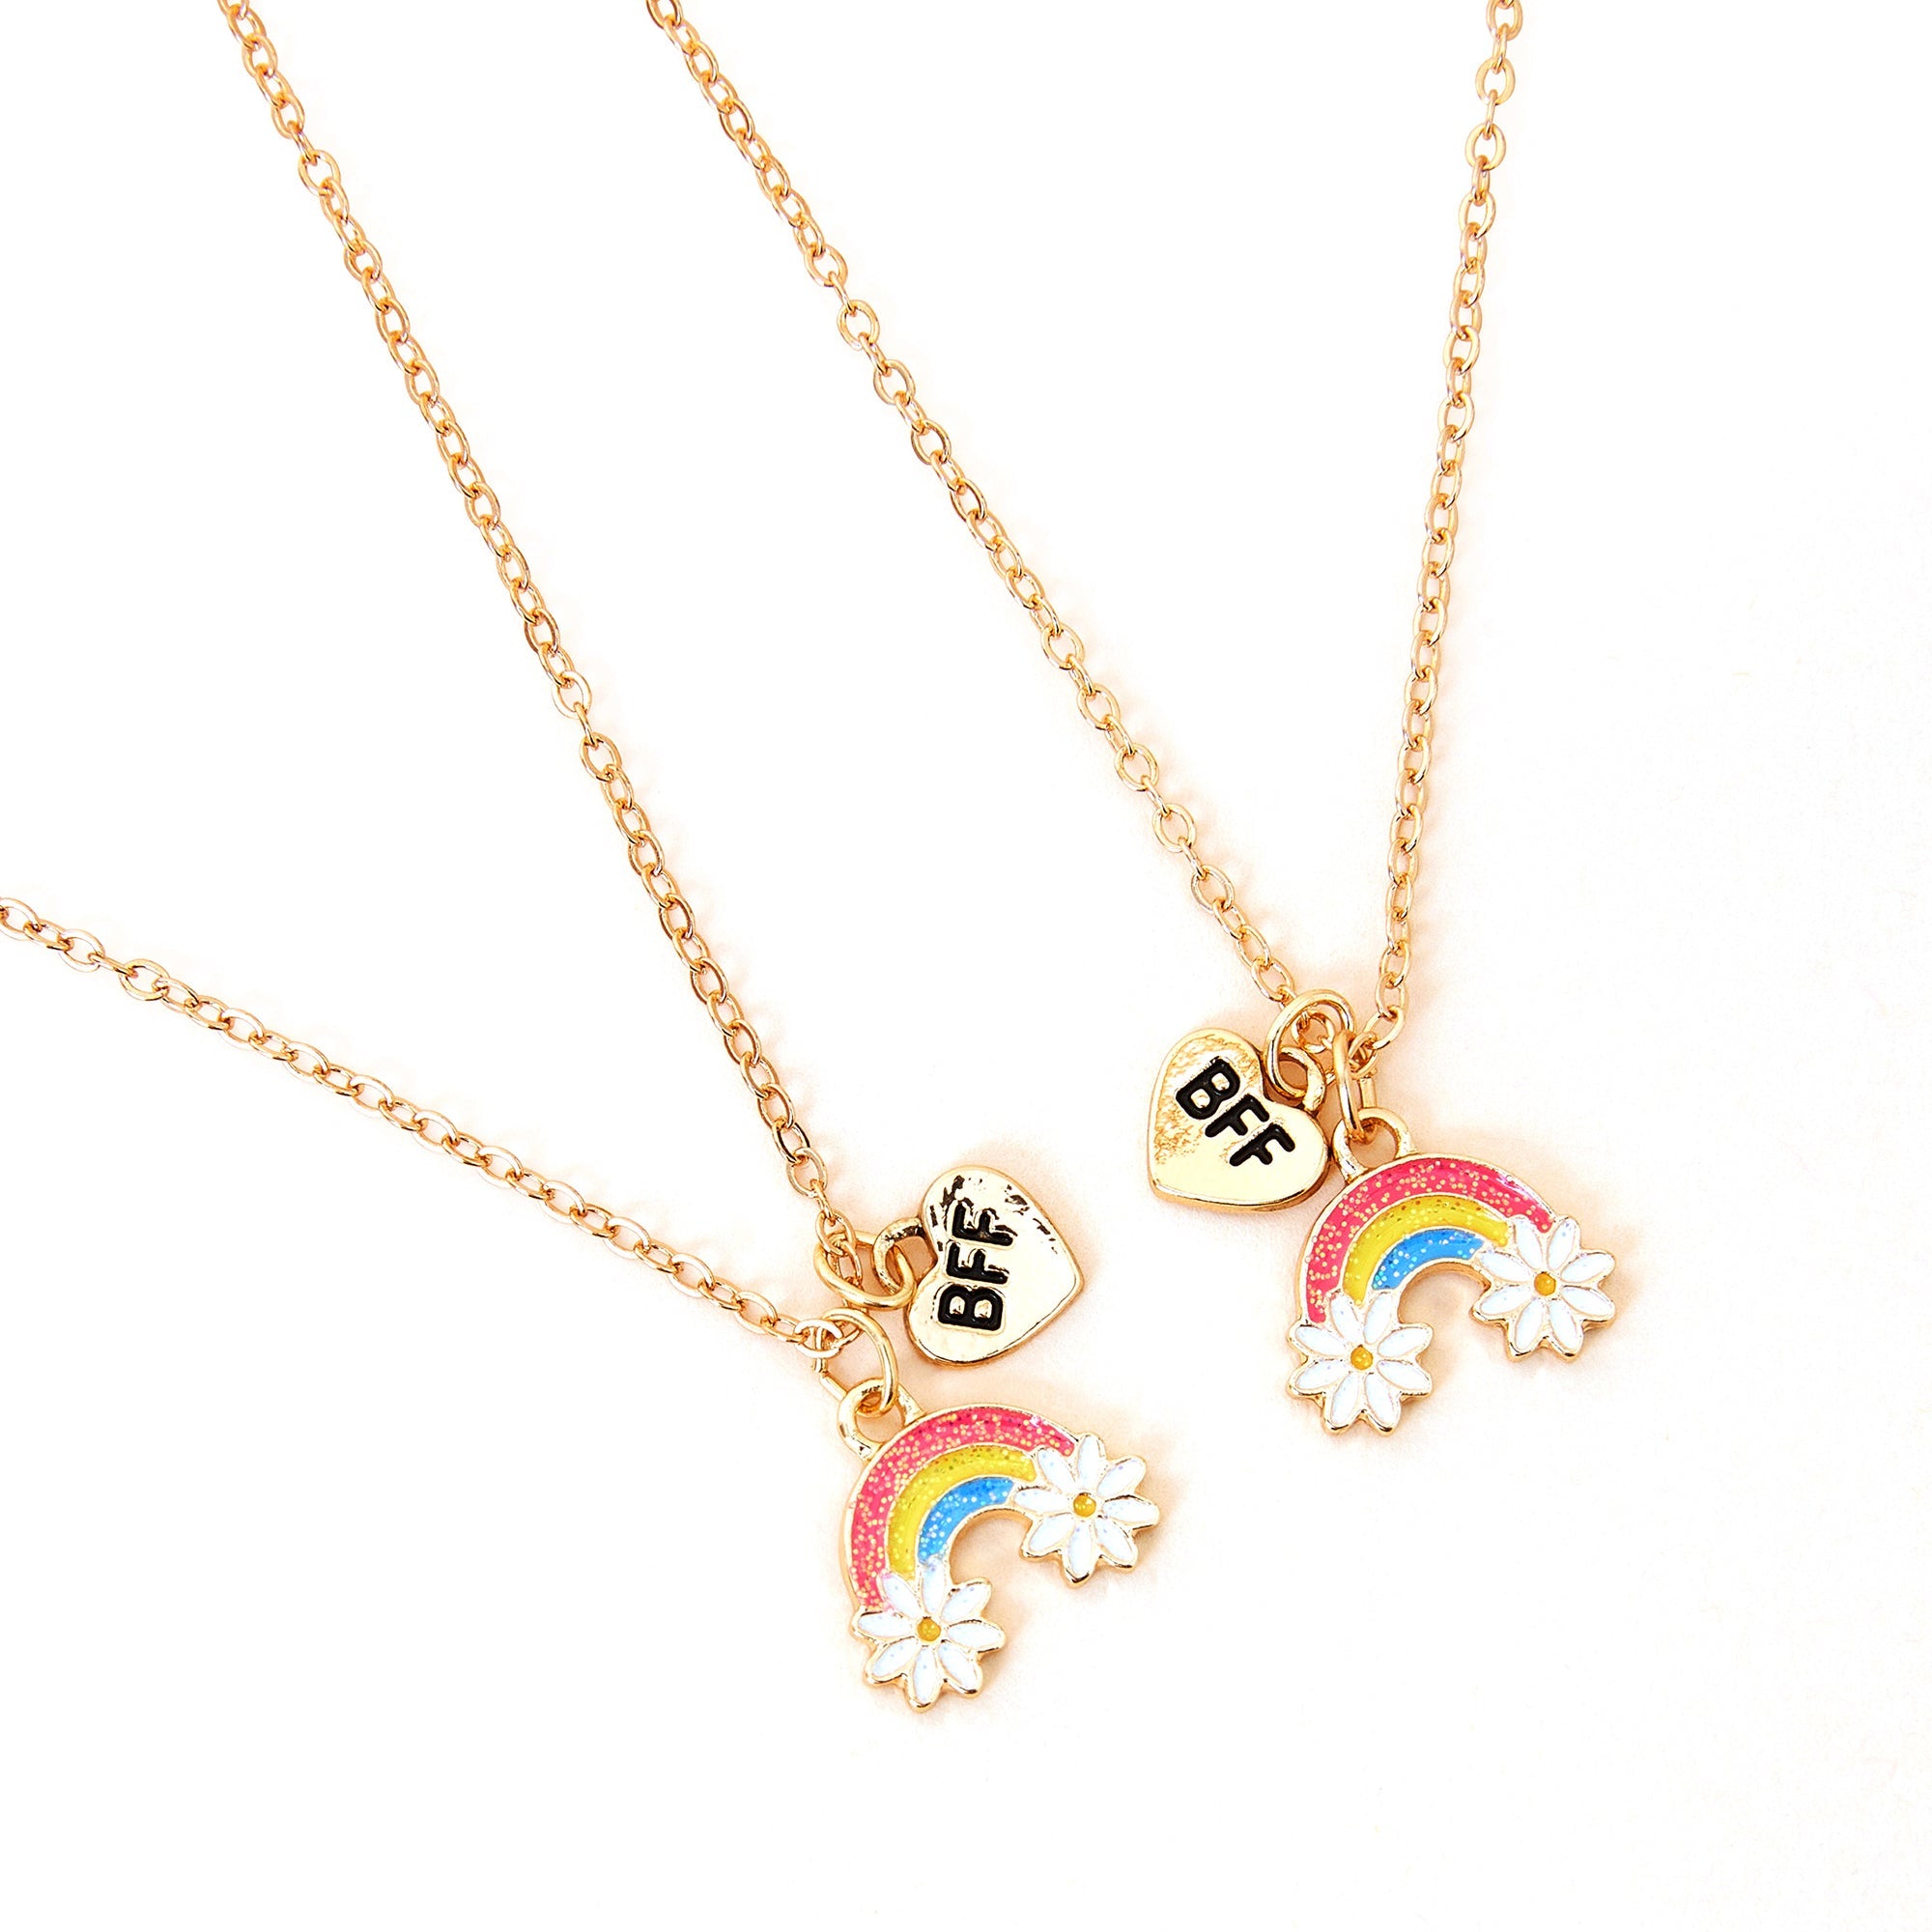 Accessorize London Girl's Bff Rainbow Necklace Set of 2